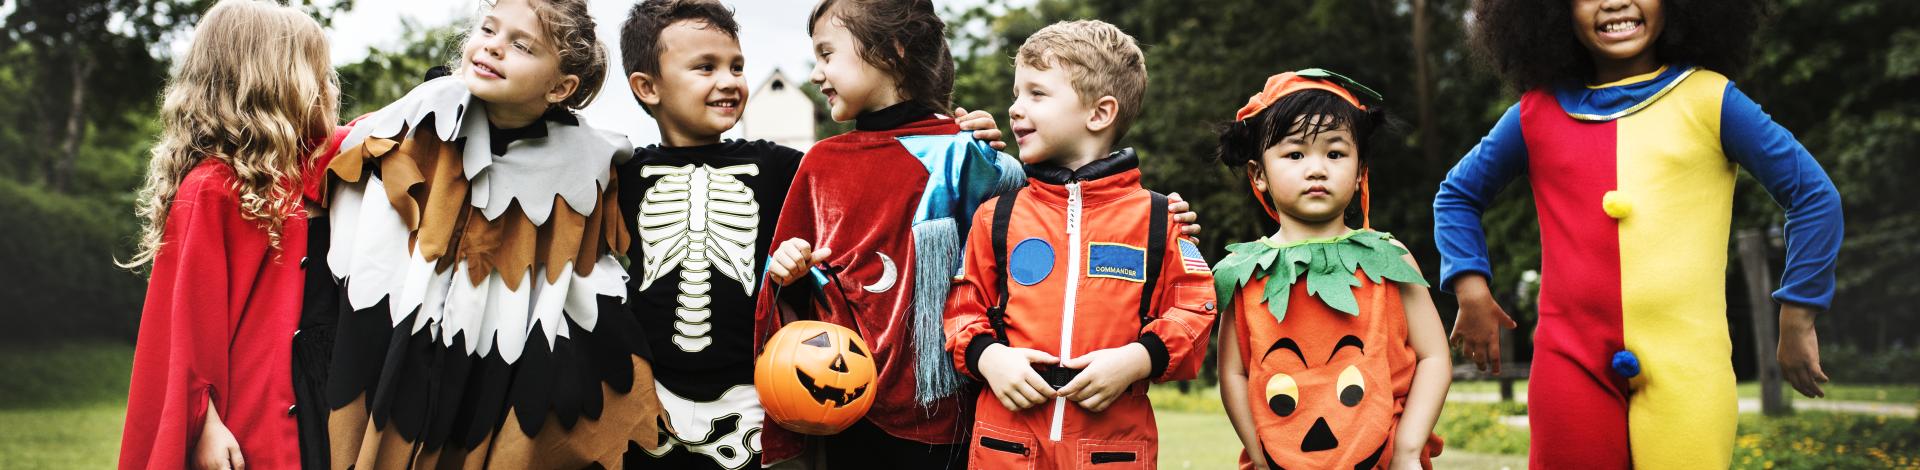 seven children dressed up in various Halloween costumes in a grass field 